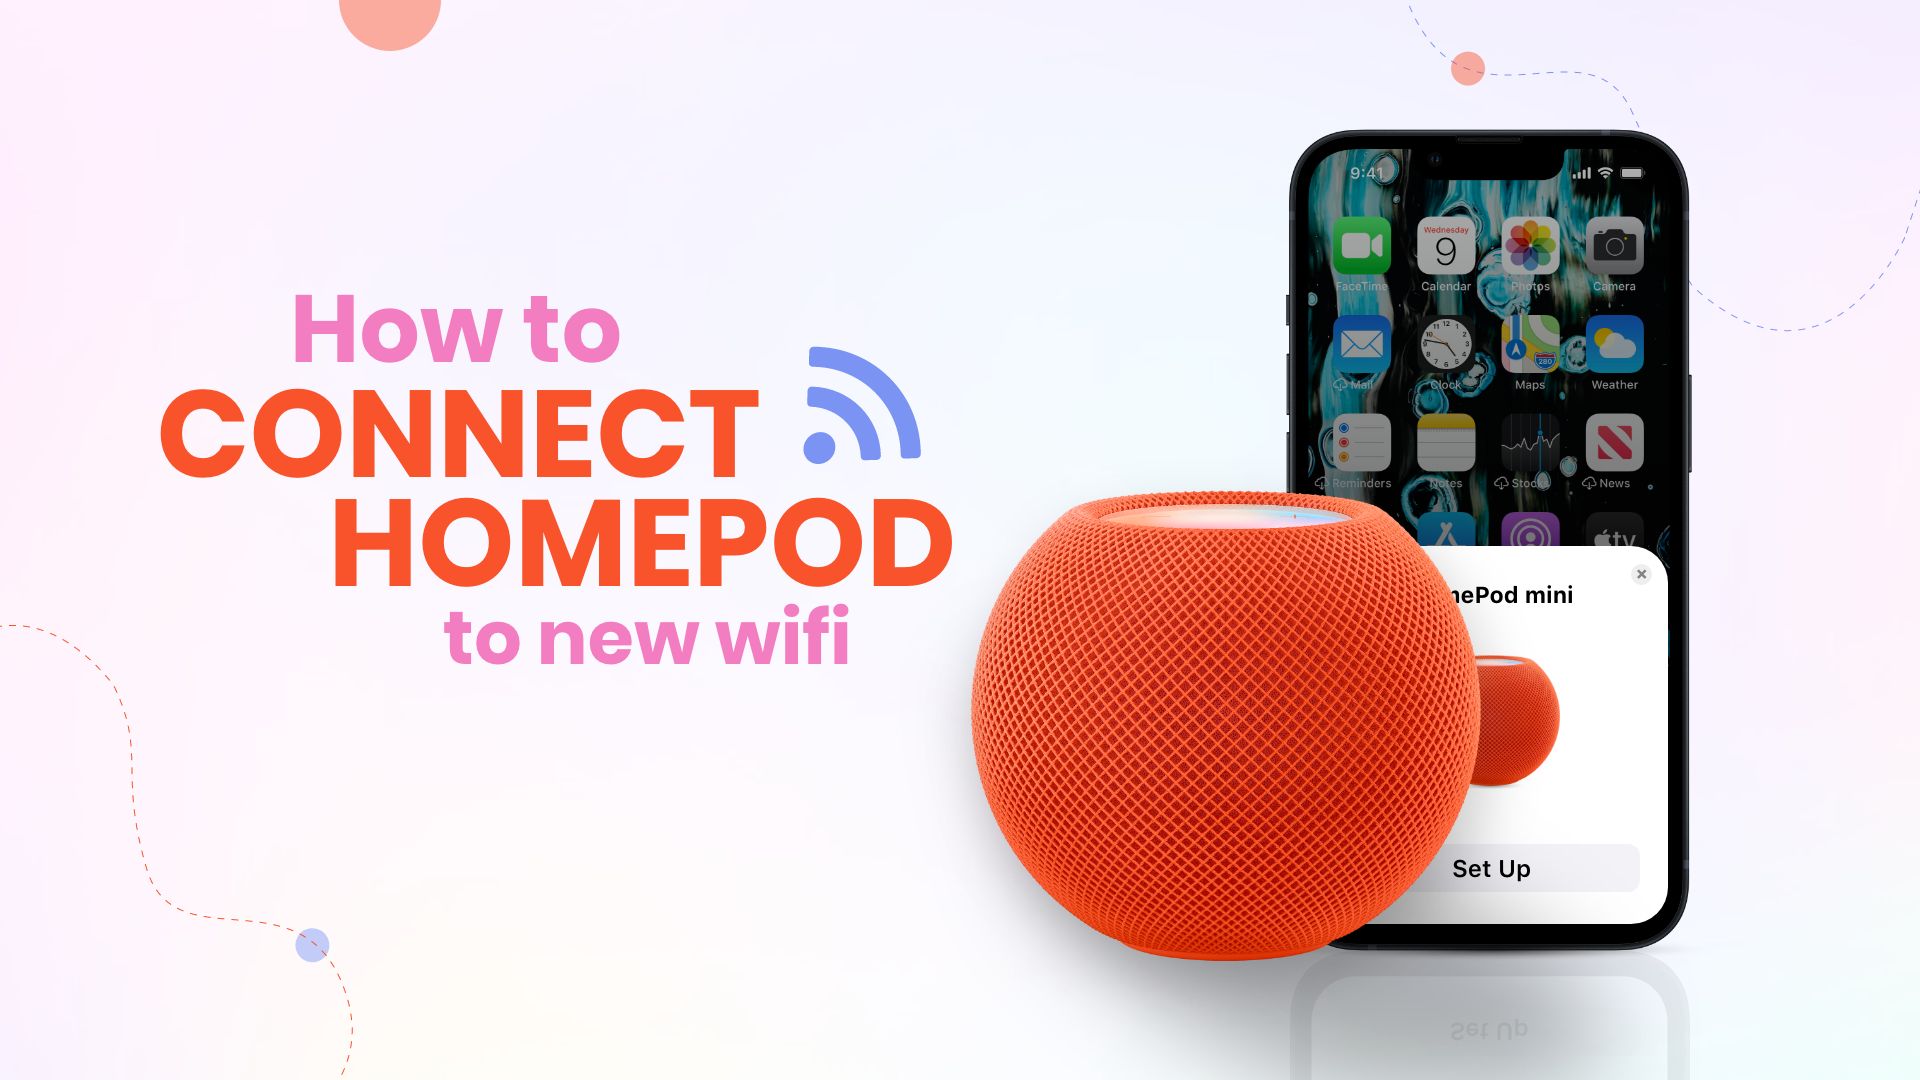 How to Connect HomePod to New WiFi